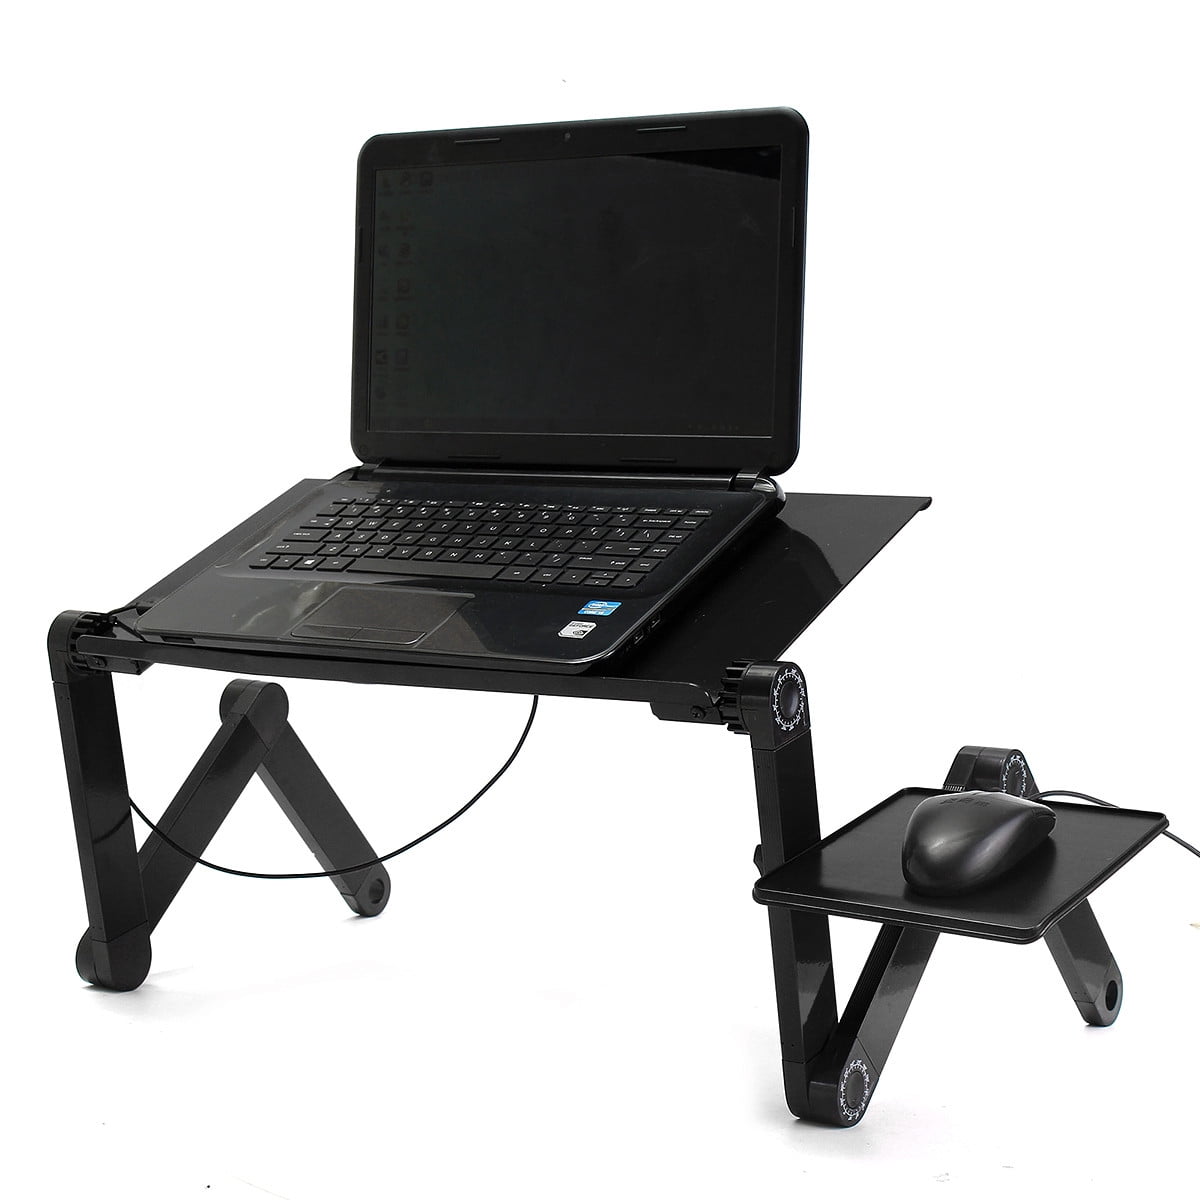 Mobile Laptop Computer Desk Cart,Portable and Adjustable Laptop Computer Table/Stand with Ventilation Holes and Mouse Pad in Bed/Couch/Sofa/Office/Carpet/Meadow 